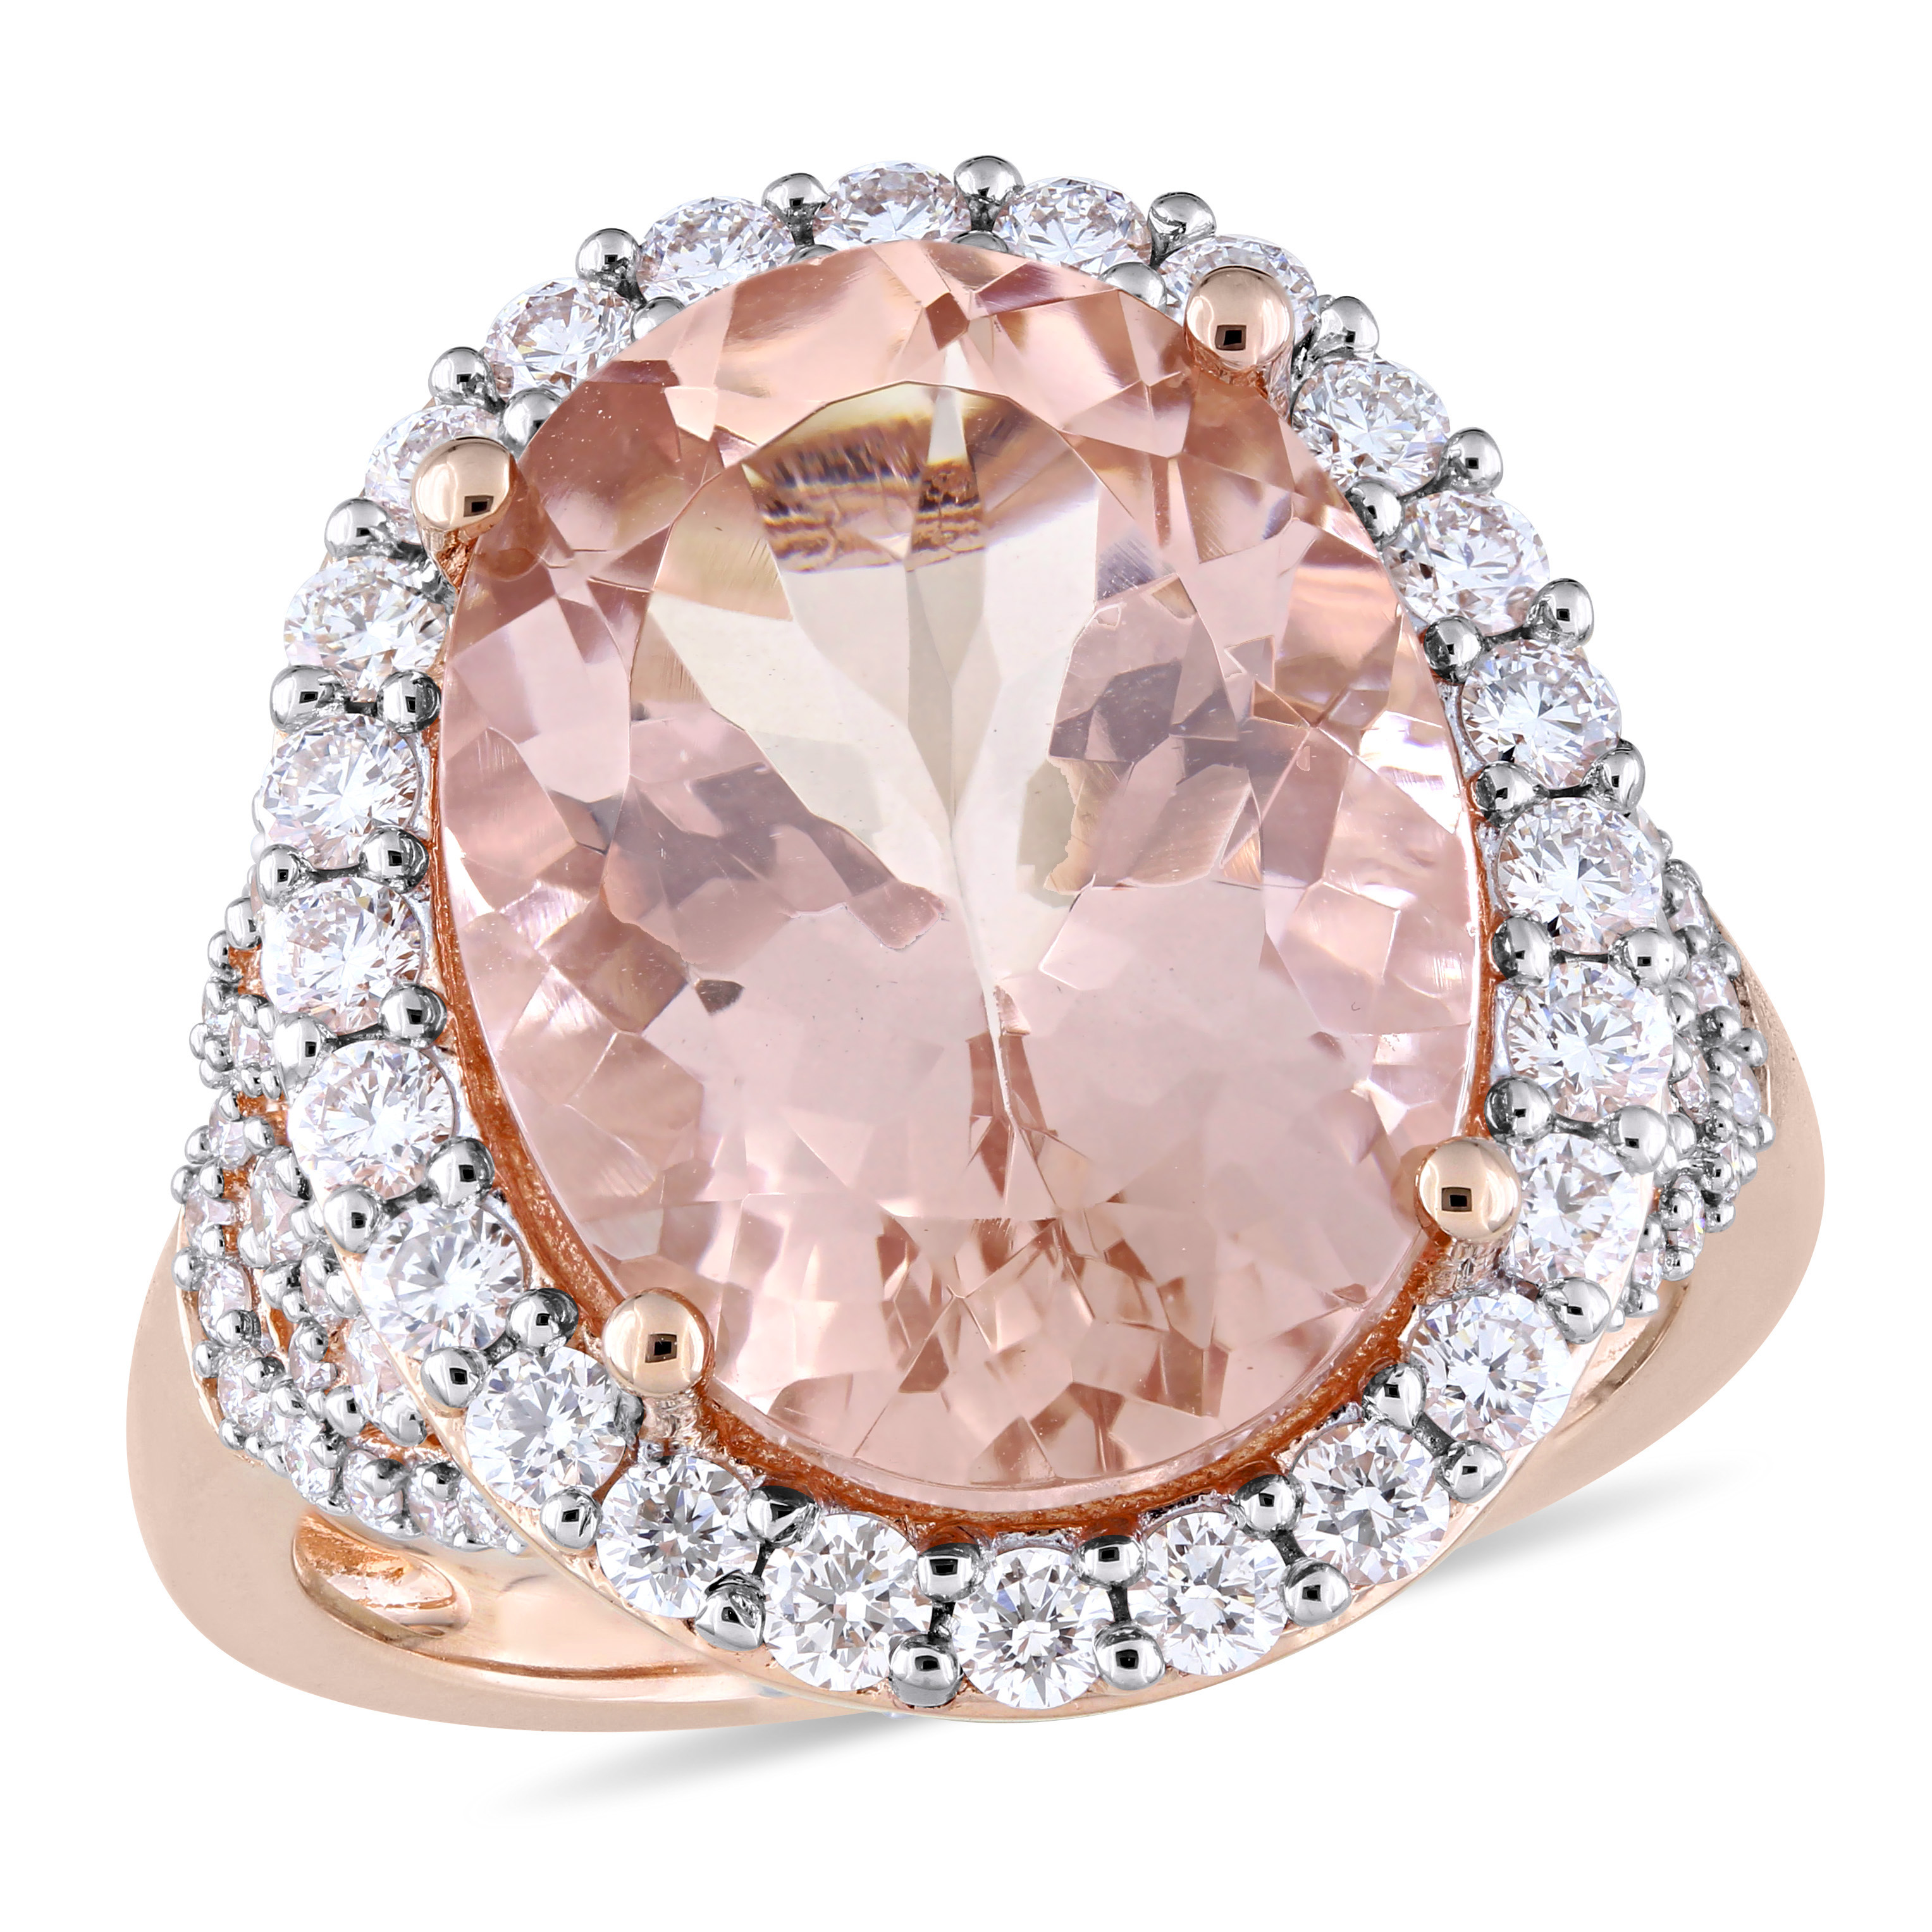 Oval-Cut Morganite and 1 2/5 CT TW Diamond Halo Cocktail Ring in 14k Rose Gold